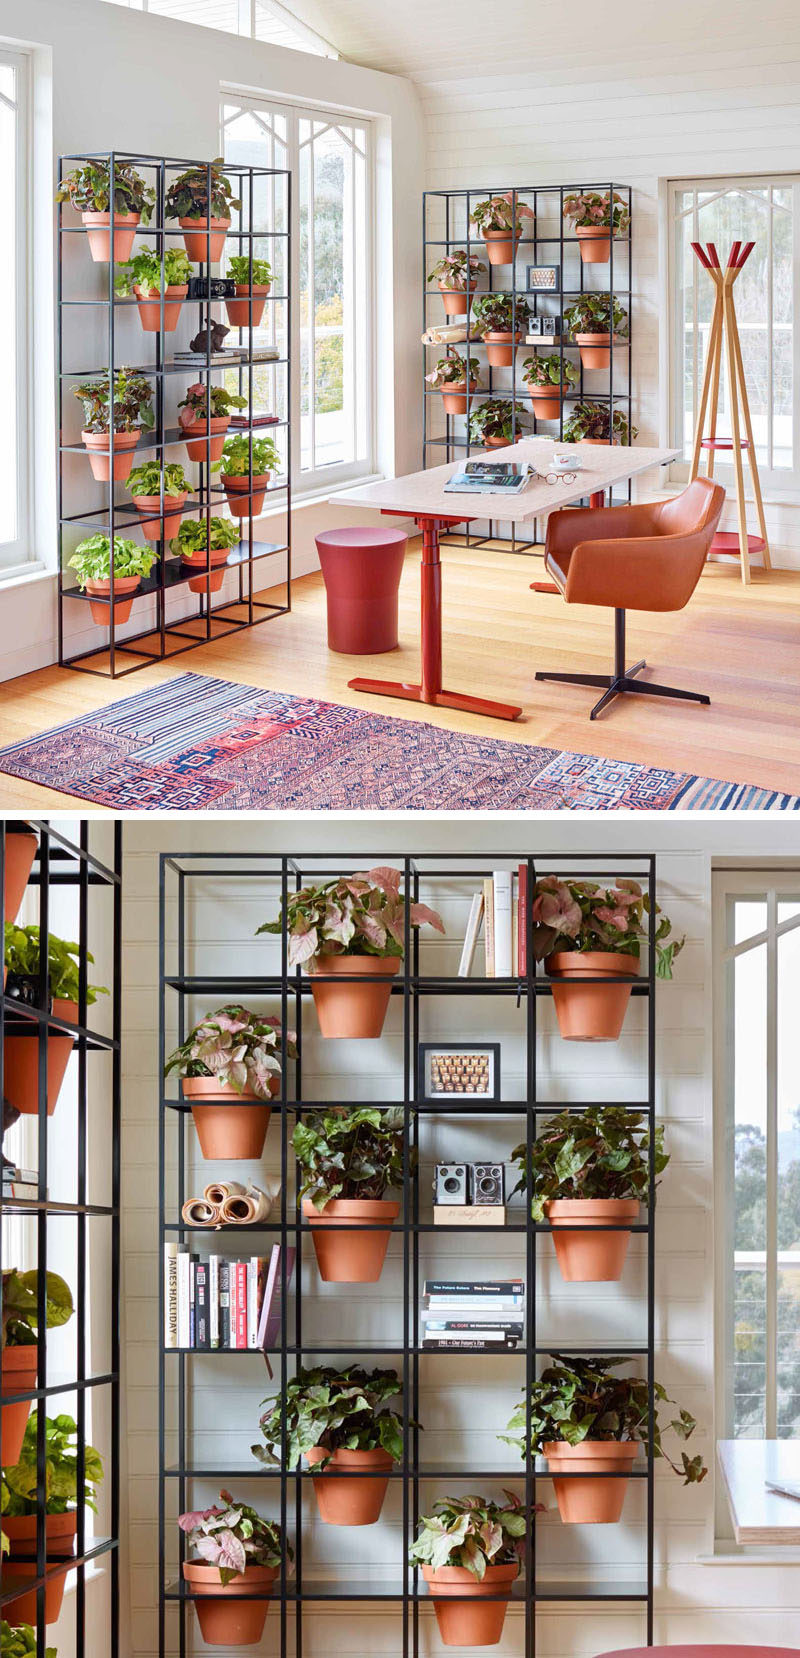 This standalone room divider is perfect for creating a vertical garden.